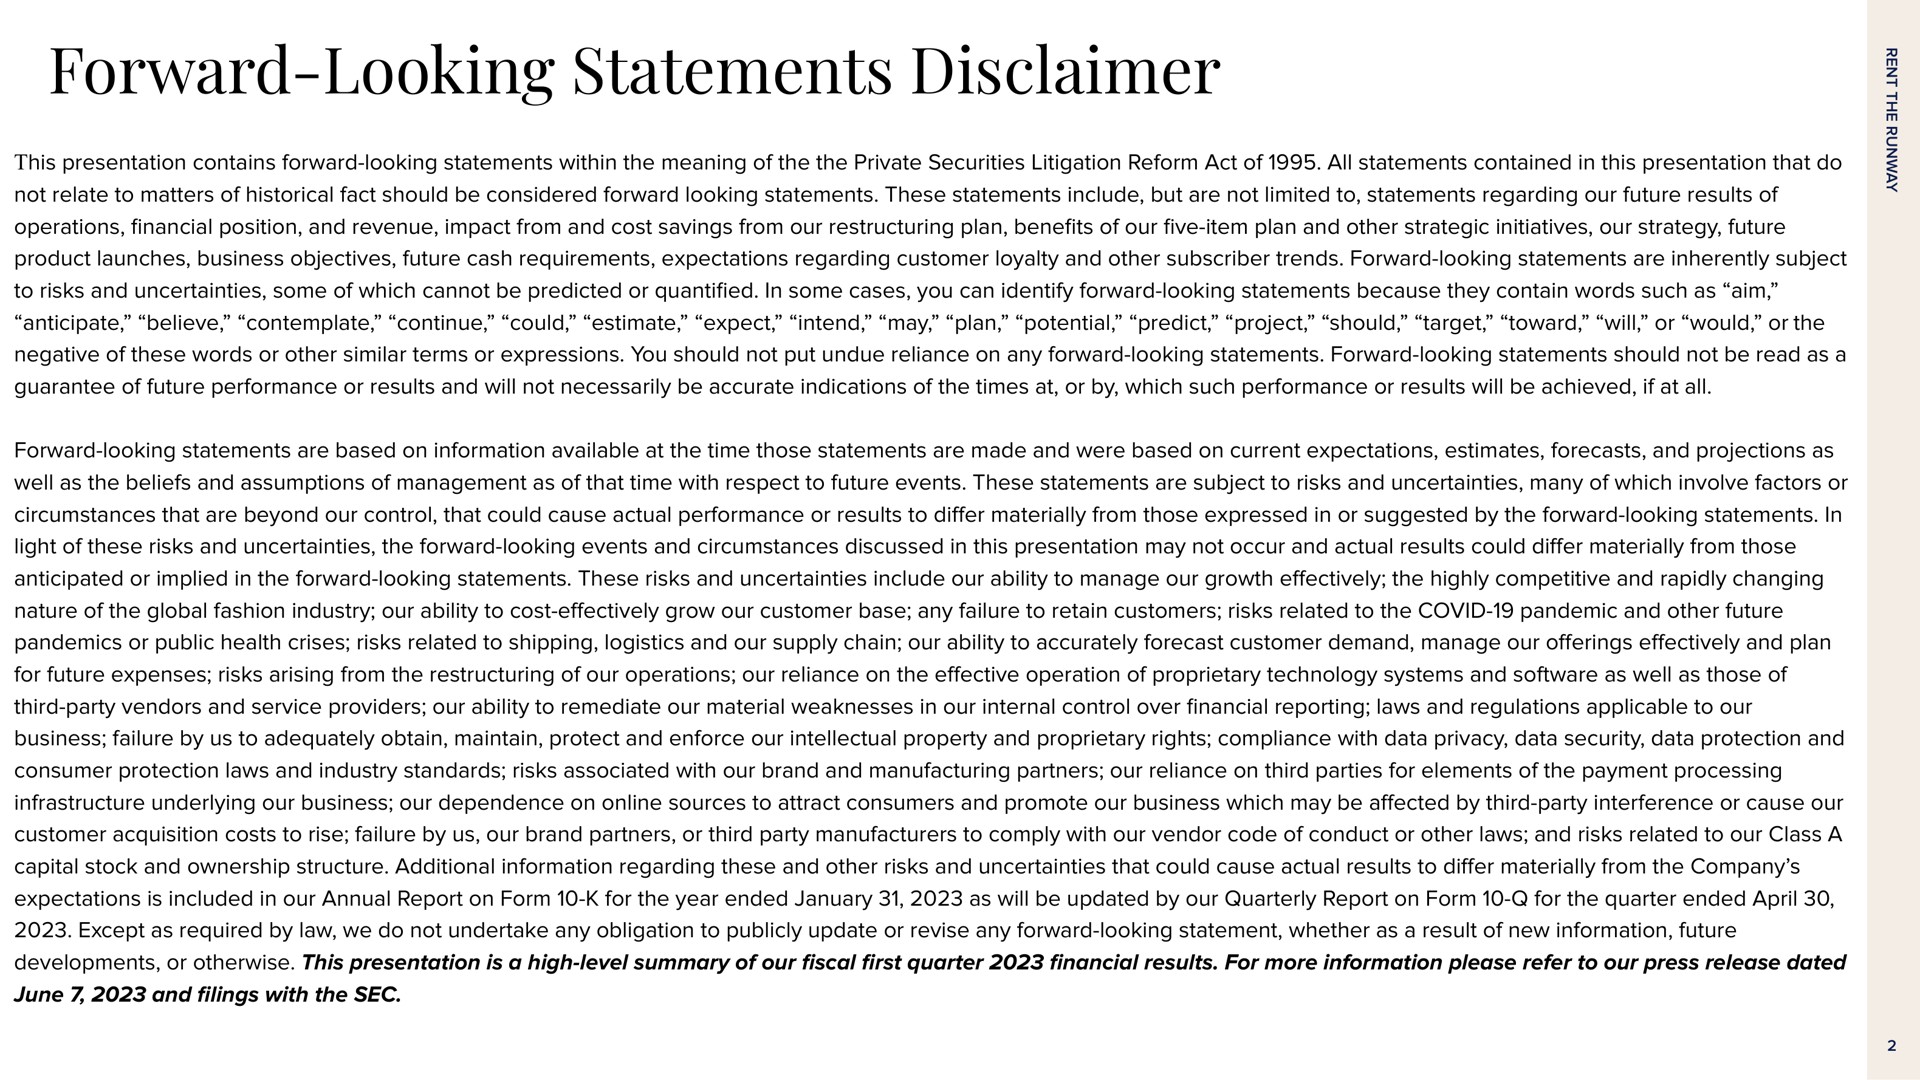 forward looking statements disclaimer | Rent The Runway